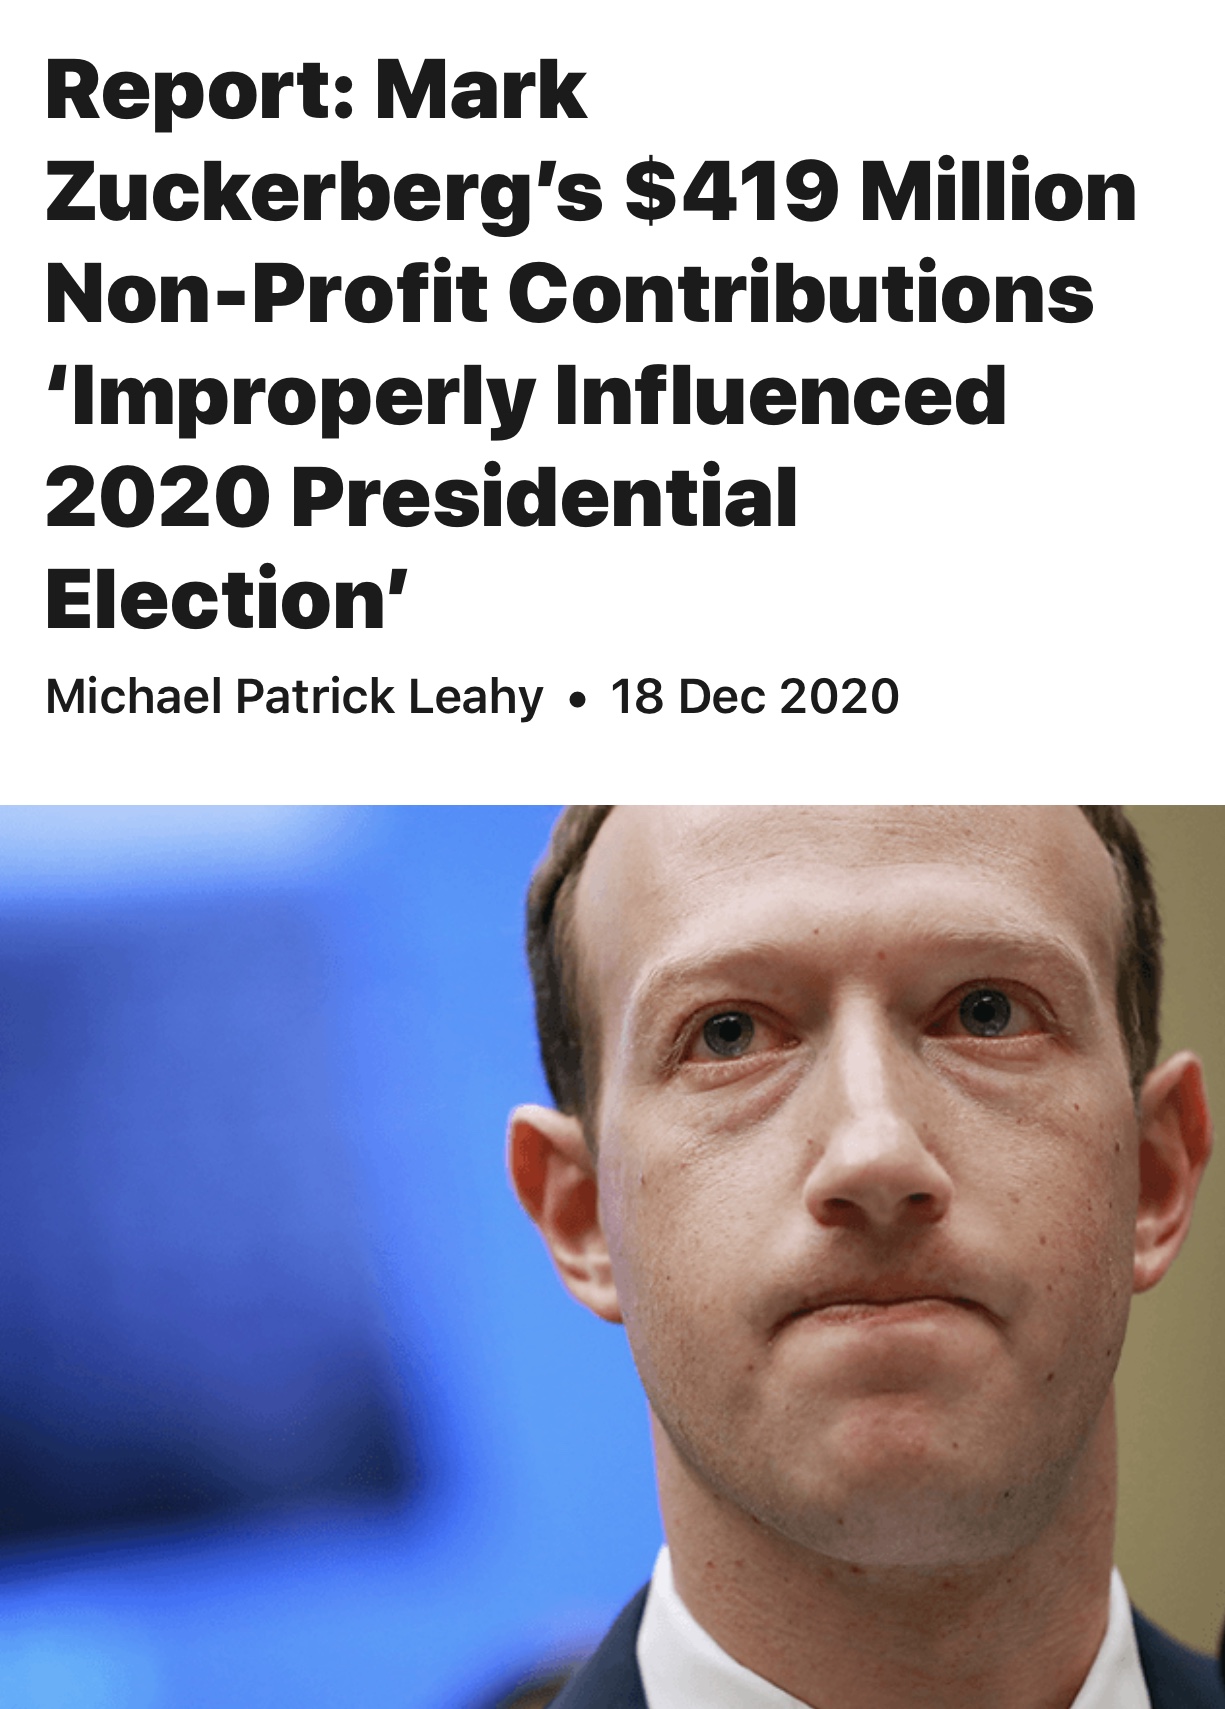 Report: Mark Zuckerberg’s $419 Million Non-Profit Contributions ‘Improperly Influenced 2020 Presidential Election’